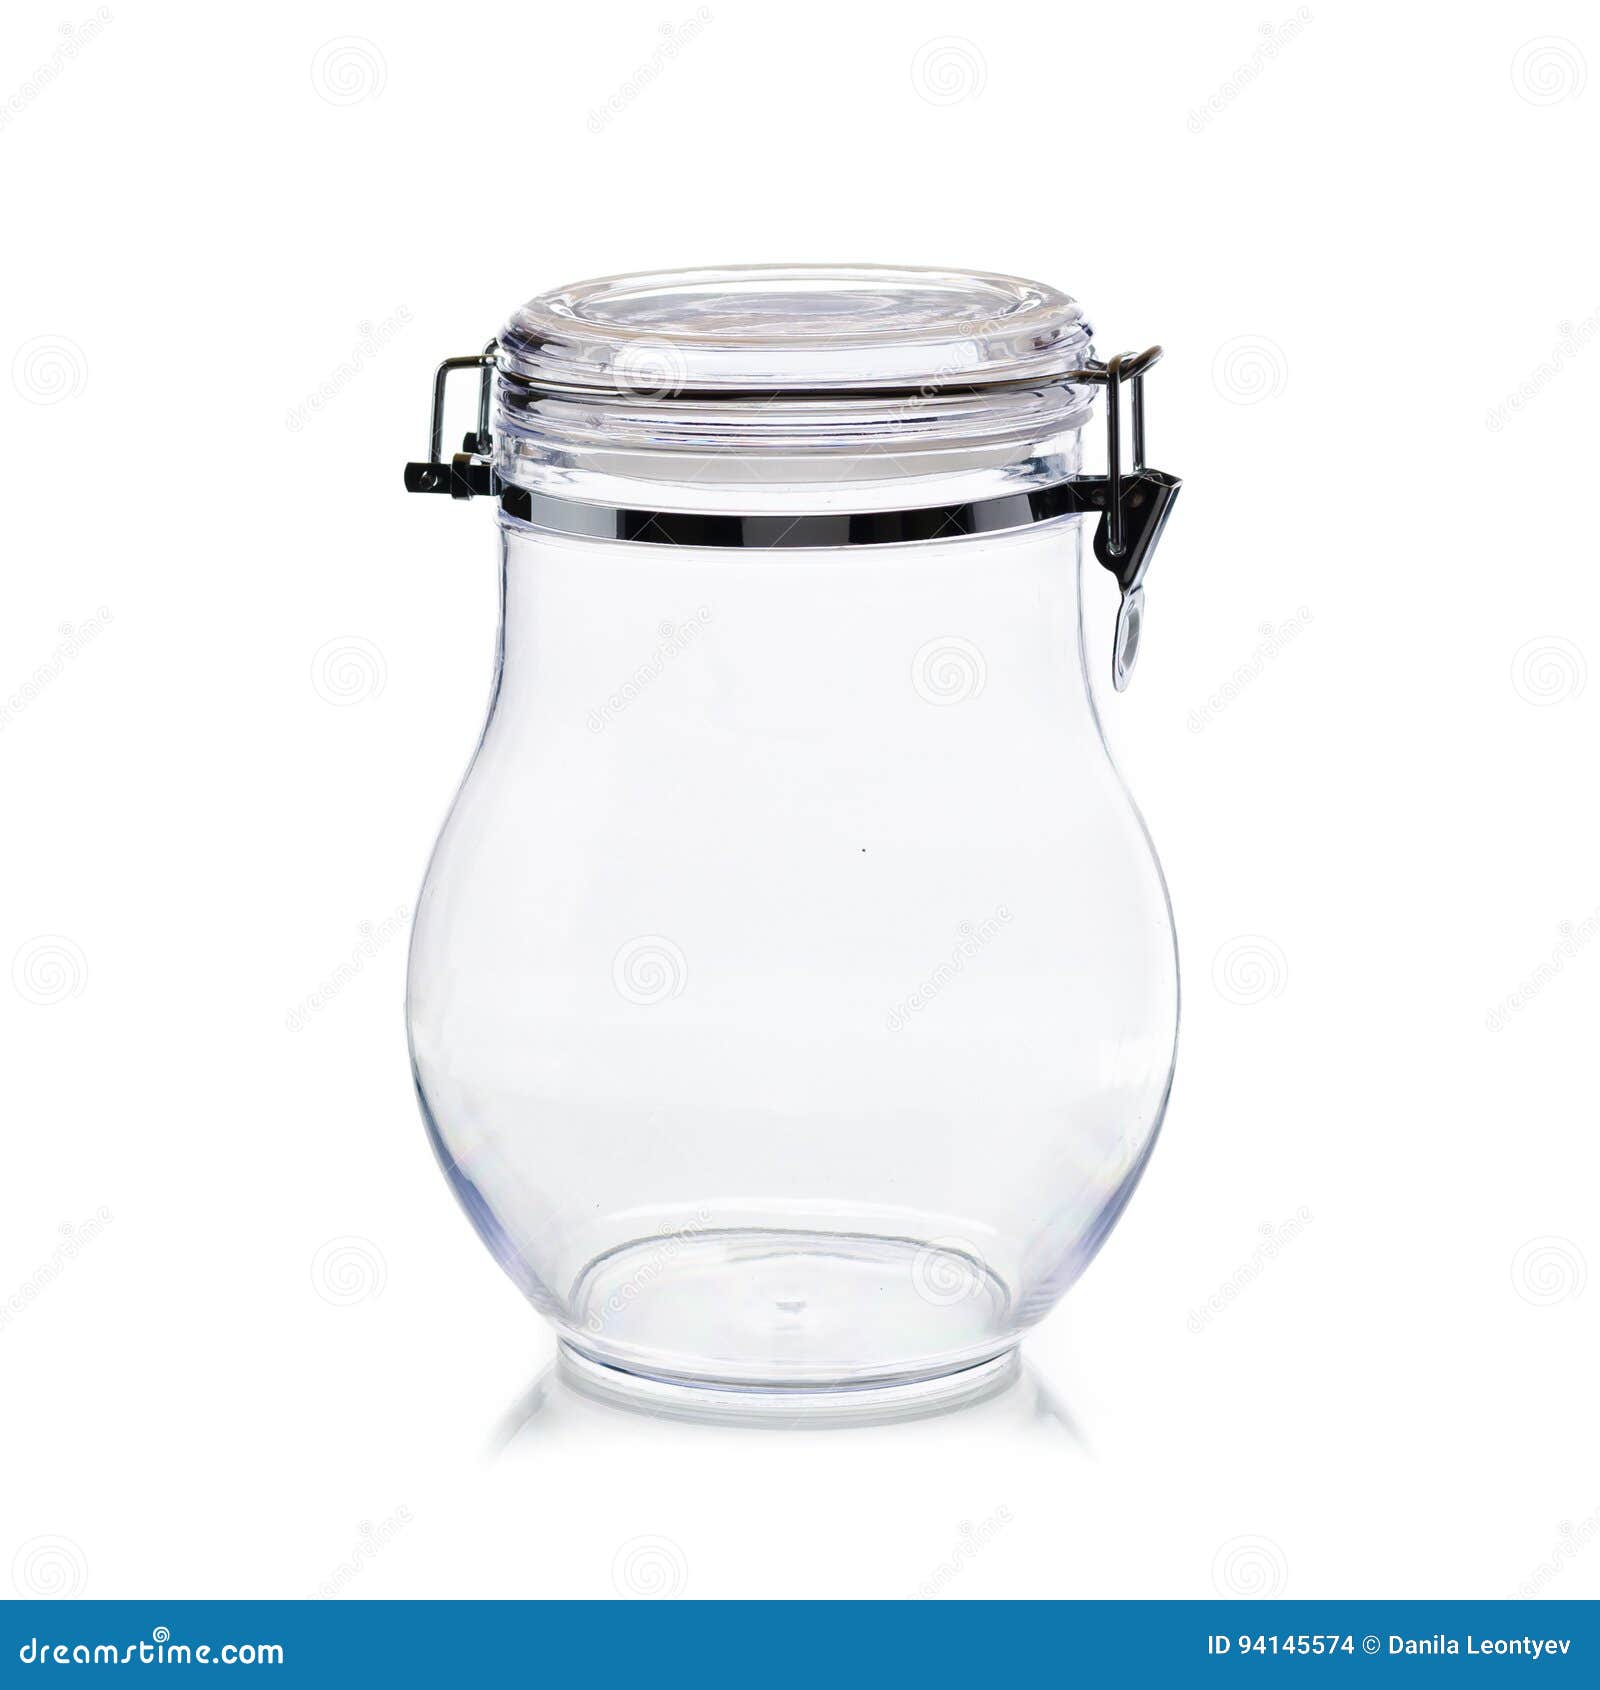 Download 14 864 Candy Jar Photos Free Royalty Free Stock Photos From Dreamstime Yellowimages Mockups